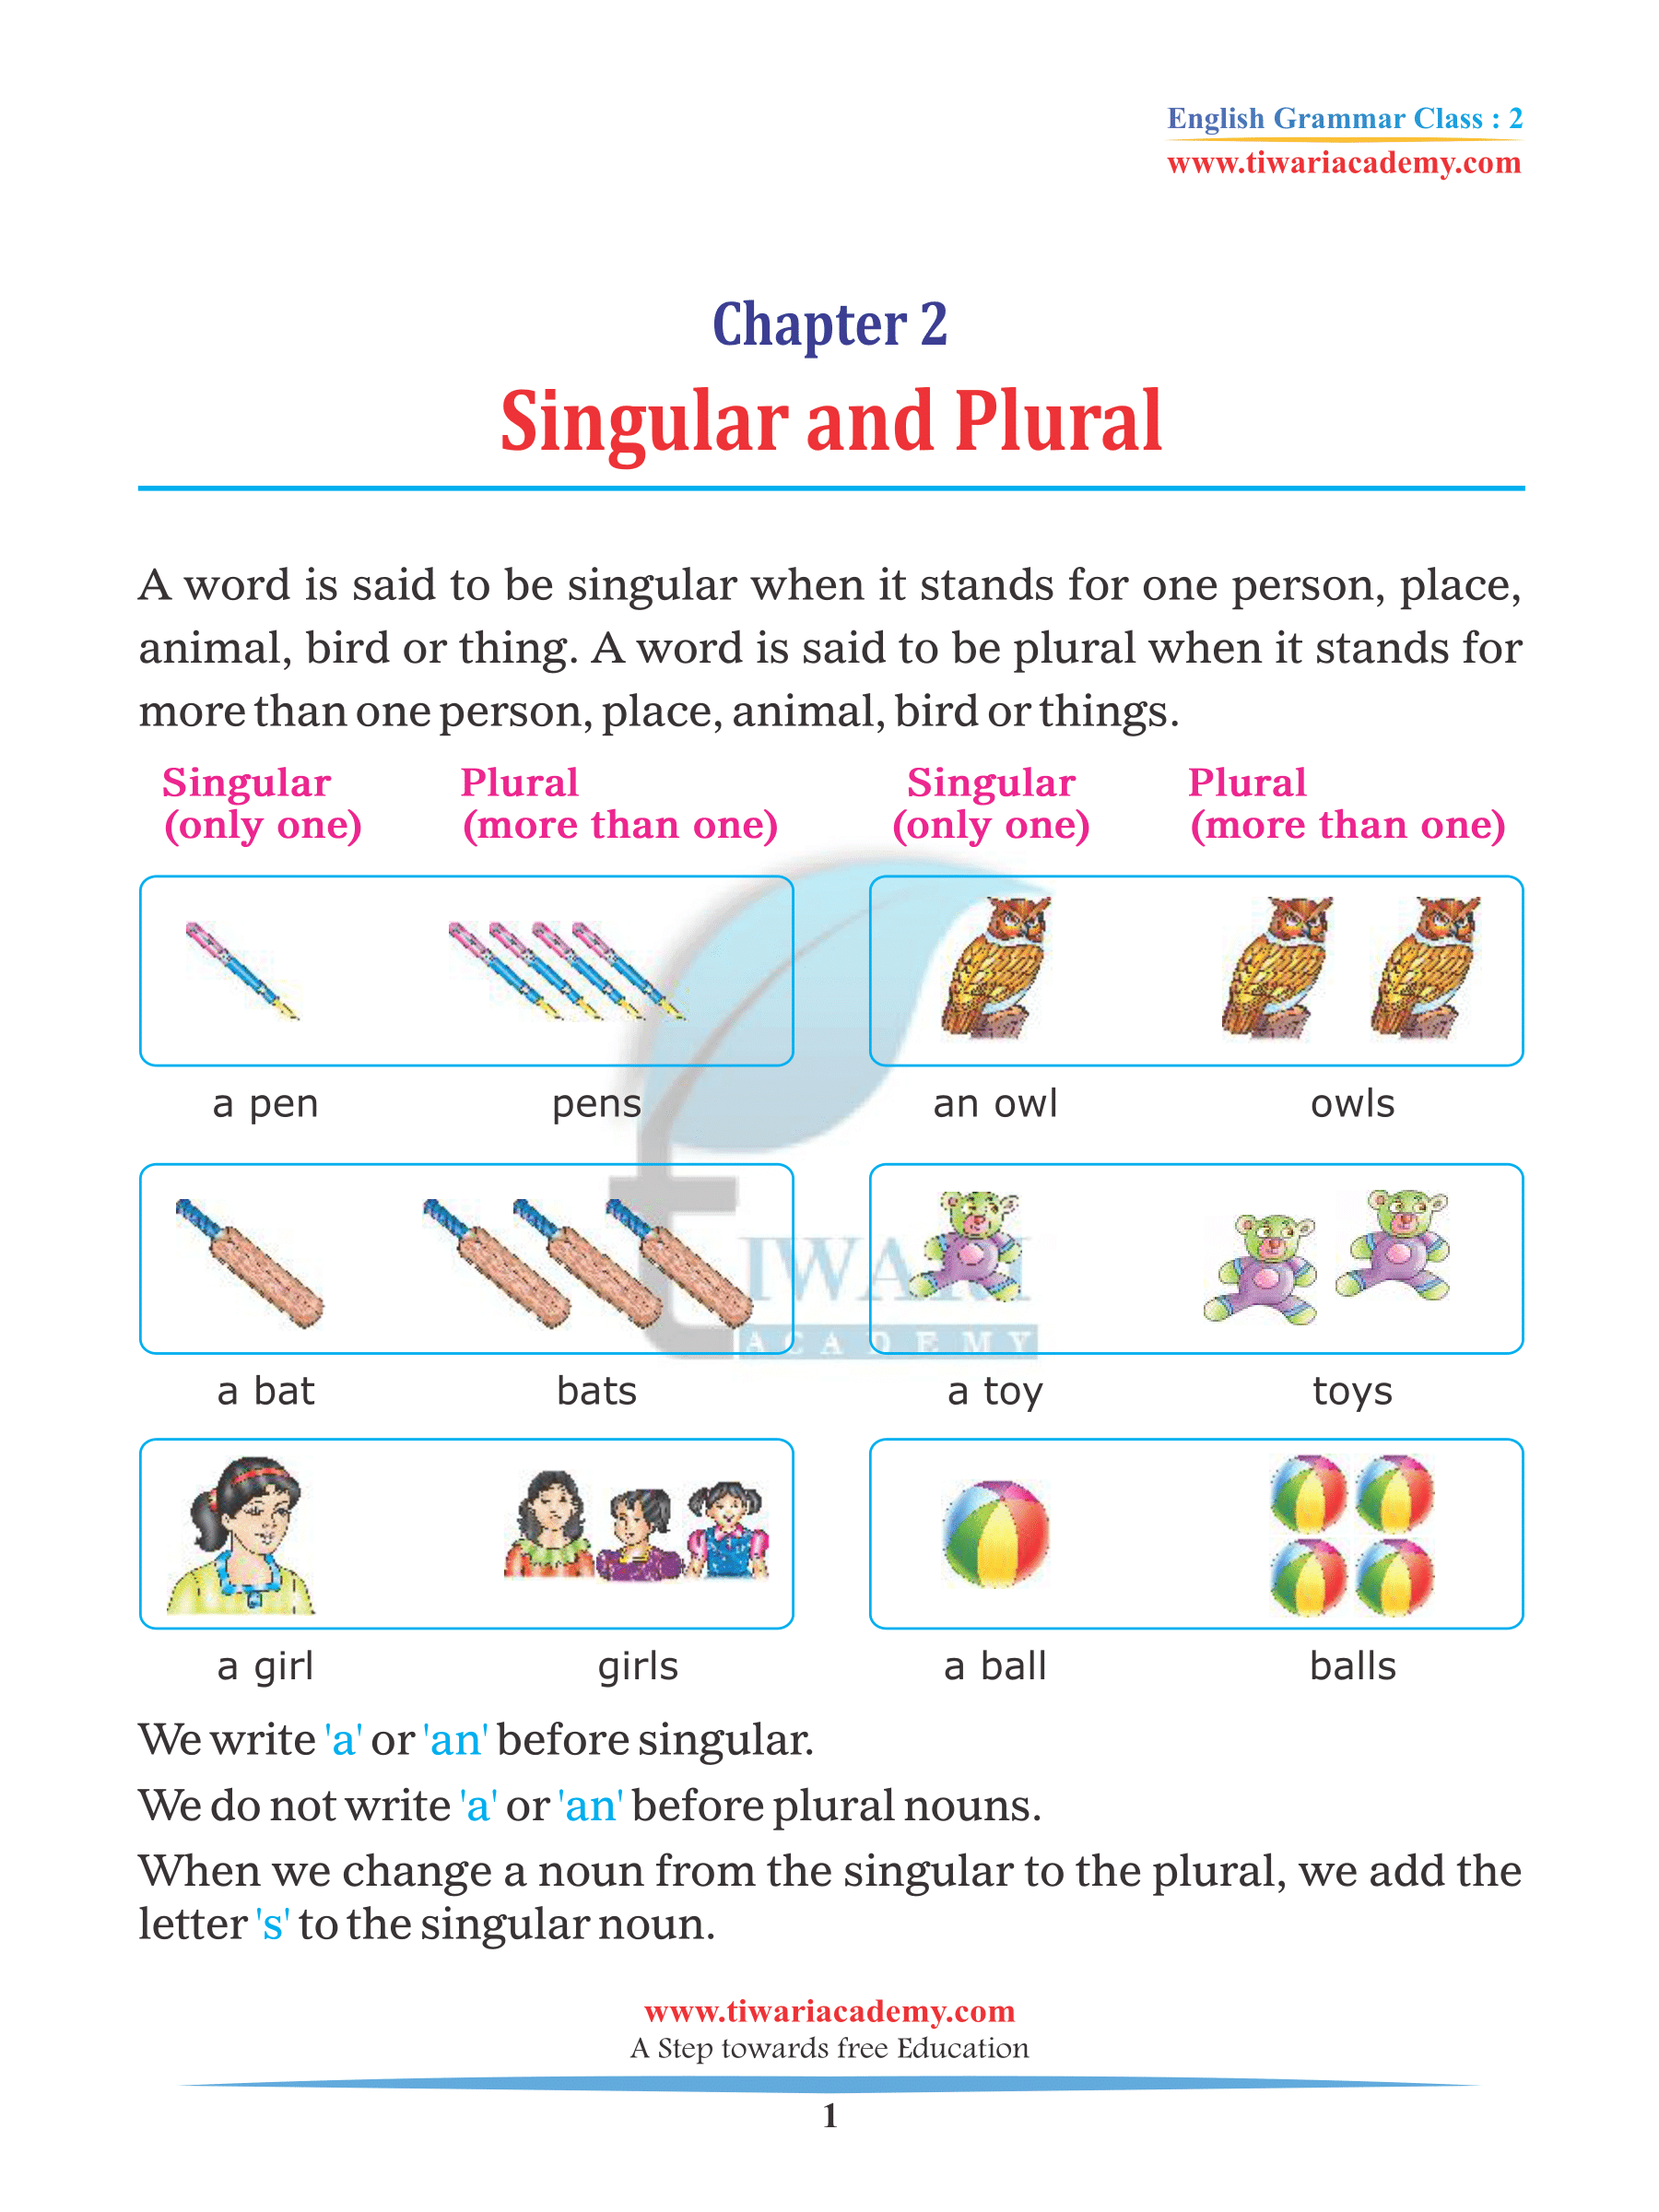 Class 2 English Grammar Chapter 2 Singular and Plural Practice